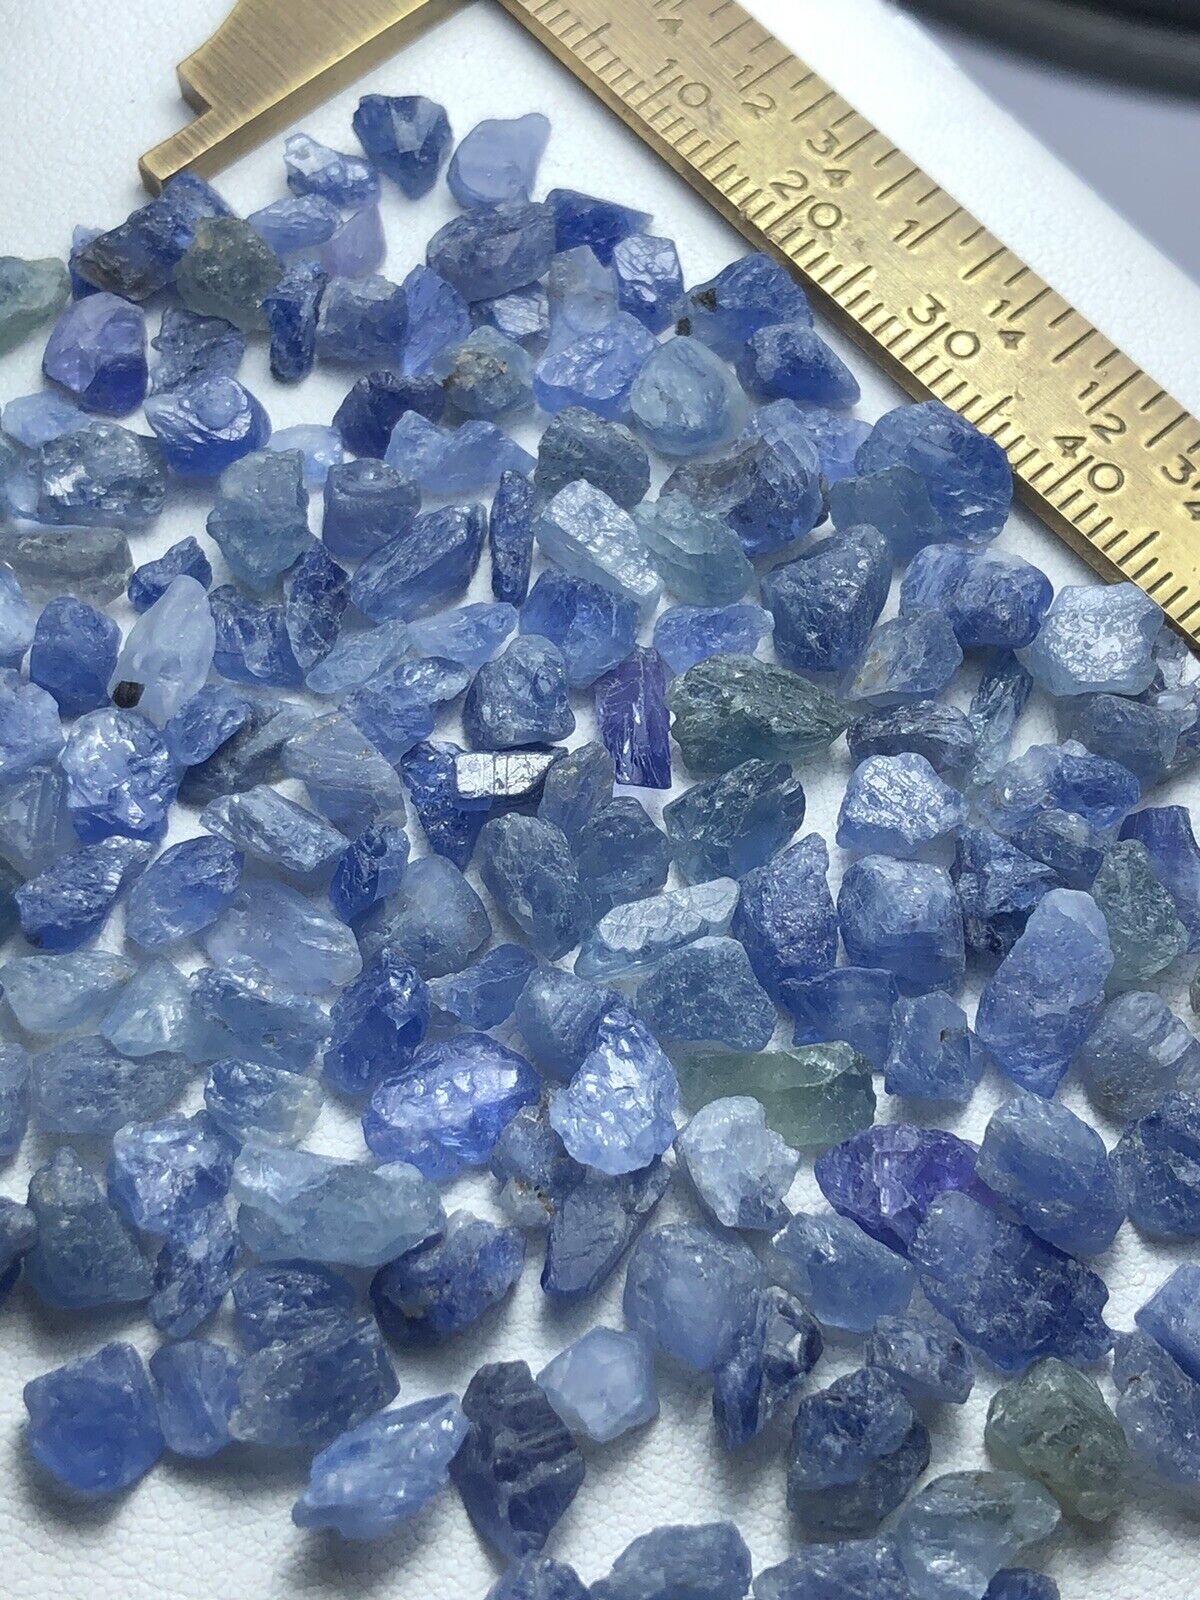 151 Crt / Rough Blue Sapphire Natural Small Size Ready For Handmade Jewelery